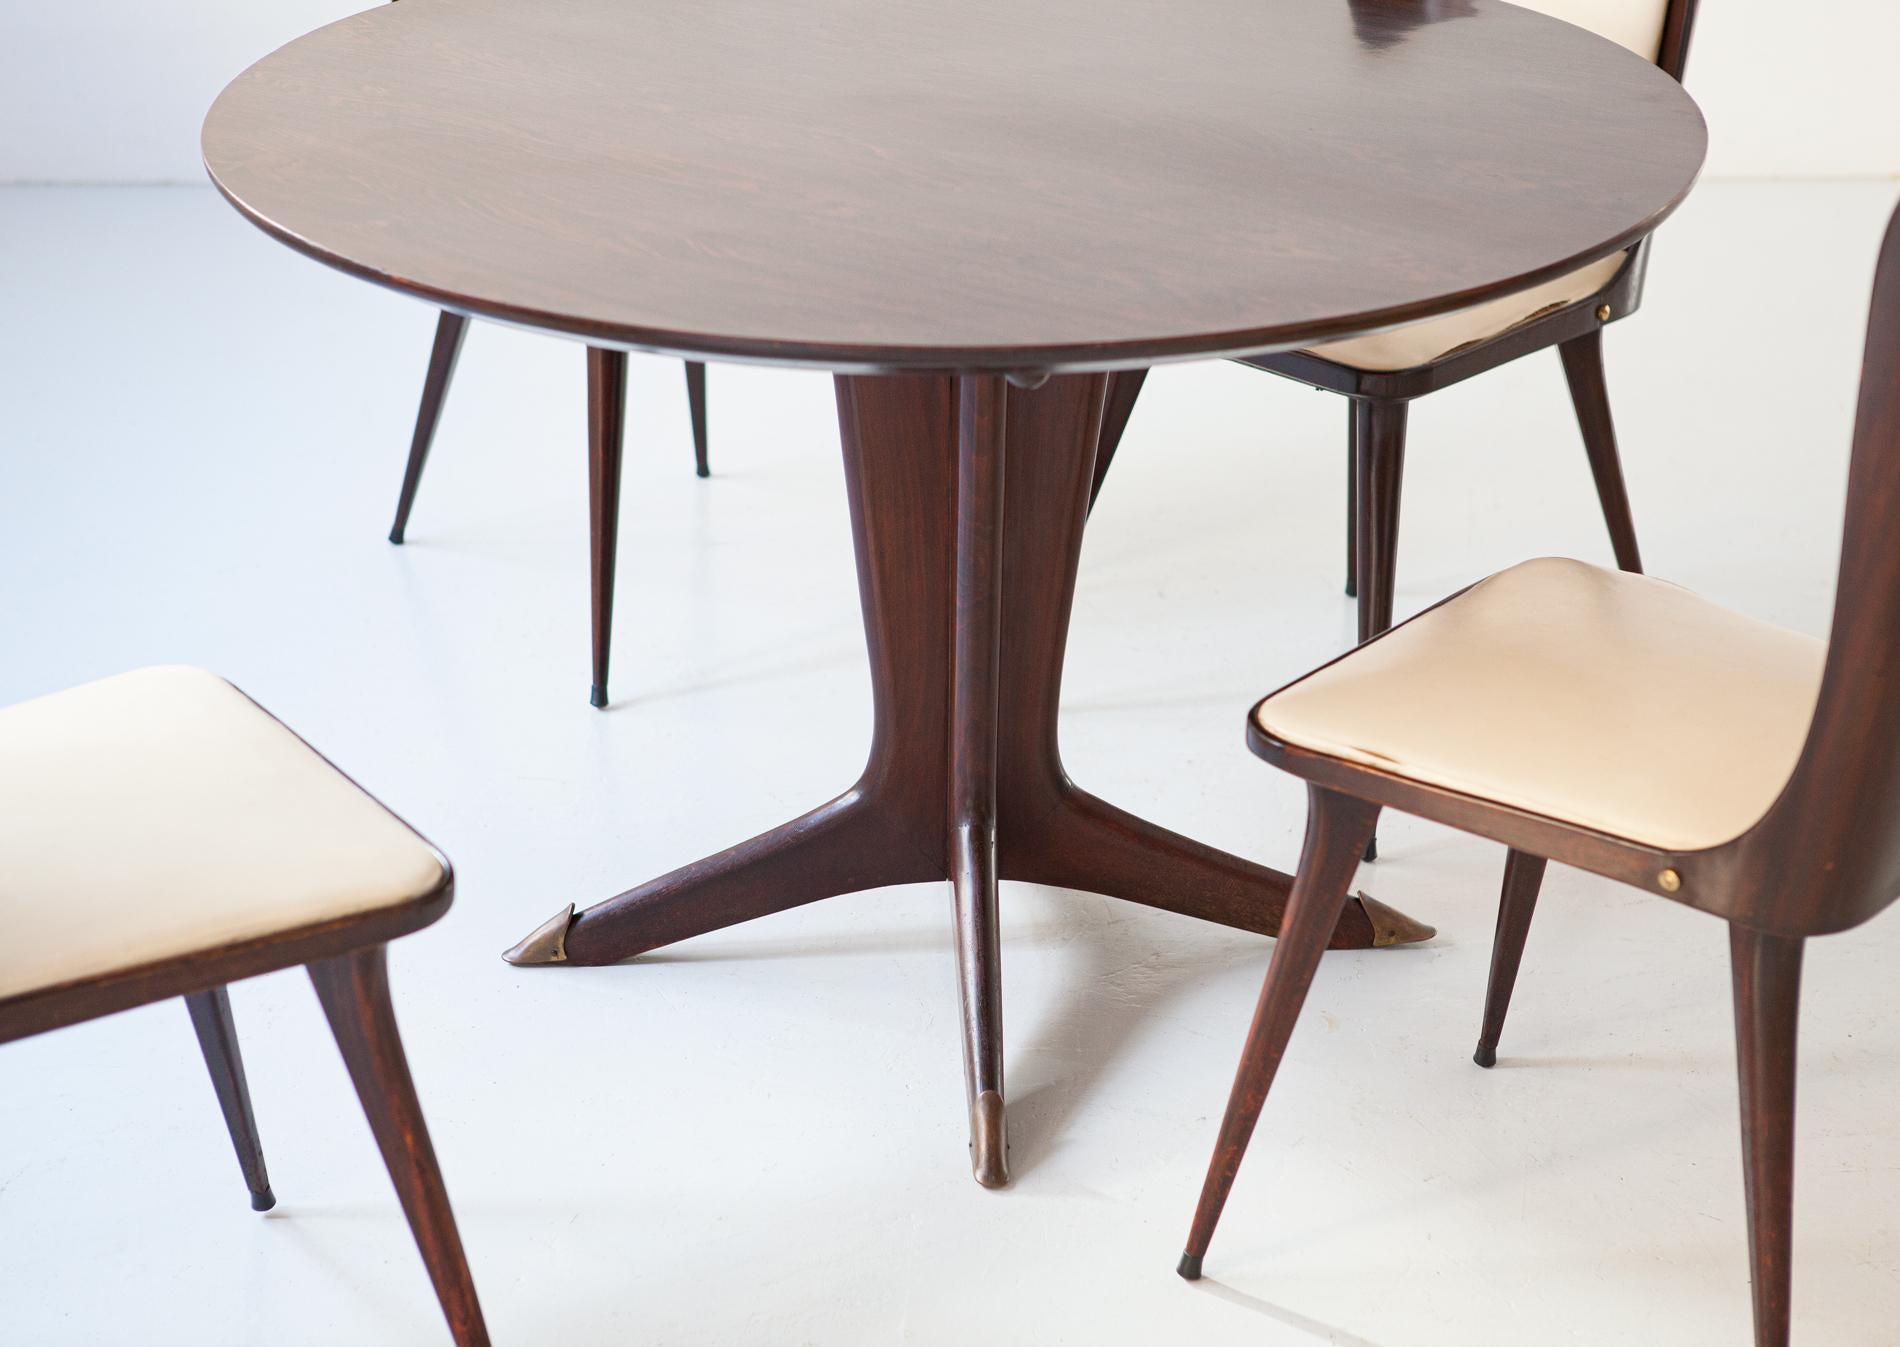 Mid-Century Modern Italian Round Wooden Dining Table with 4 Chairs Set by Carlo Ratti